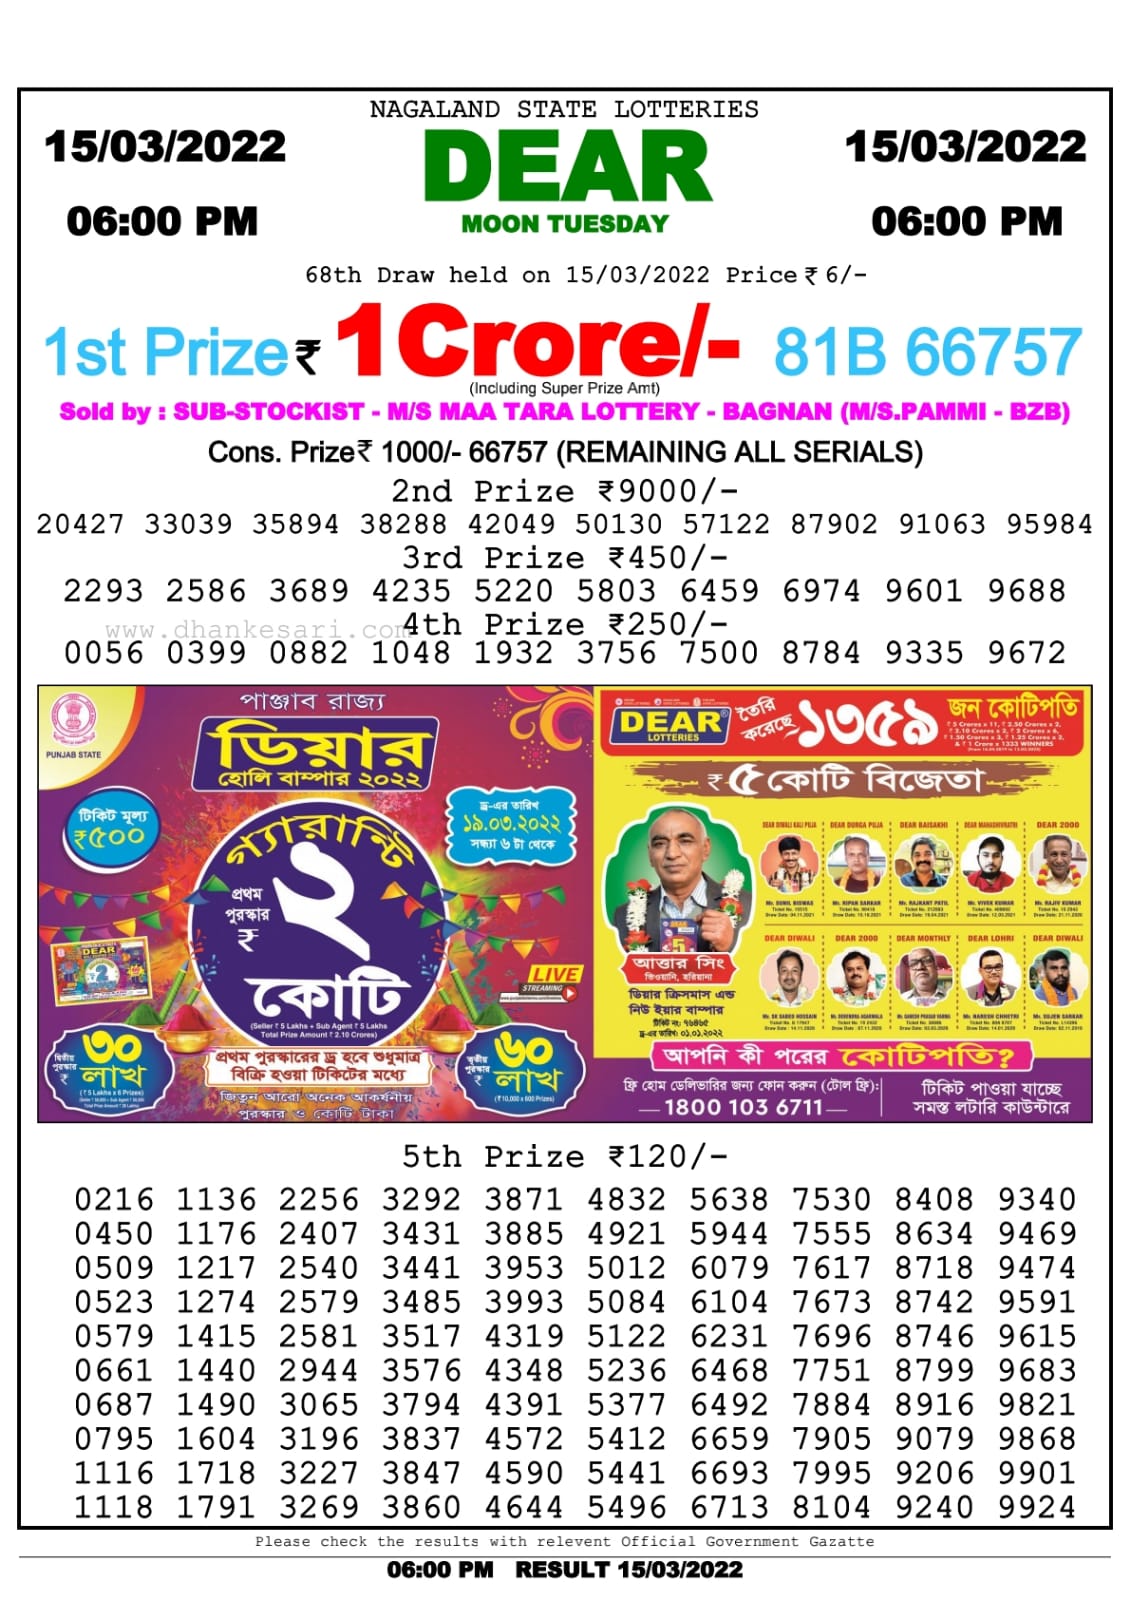 Dear Lottery Nagaland state Lottery Results 06.00 pm 15.03.2022